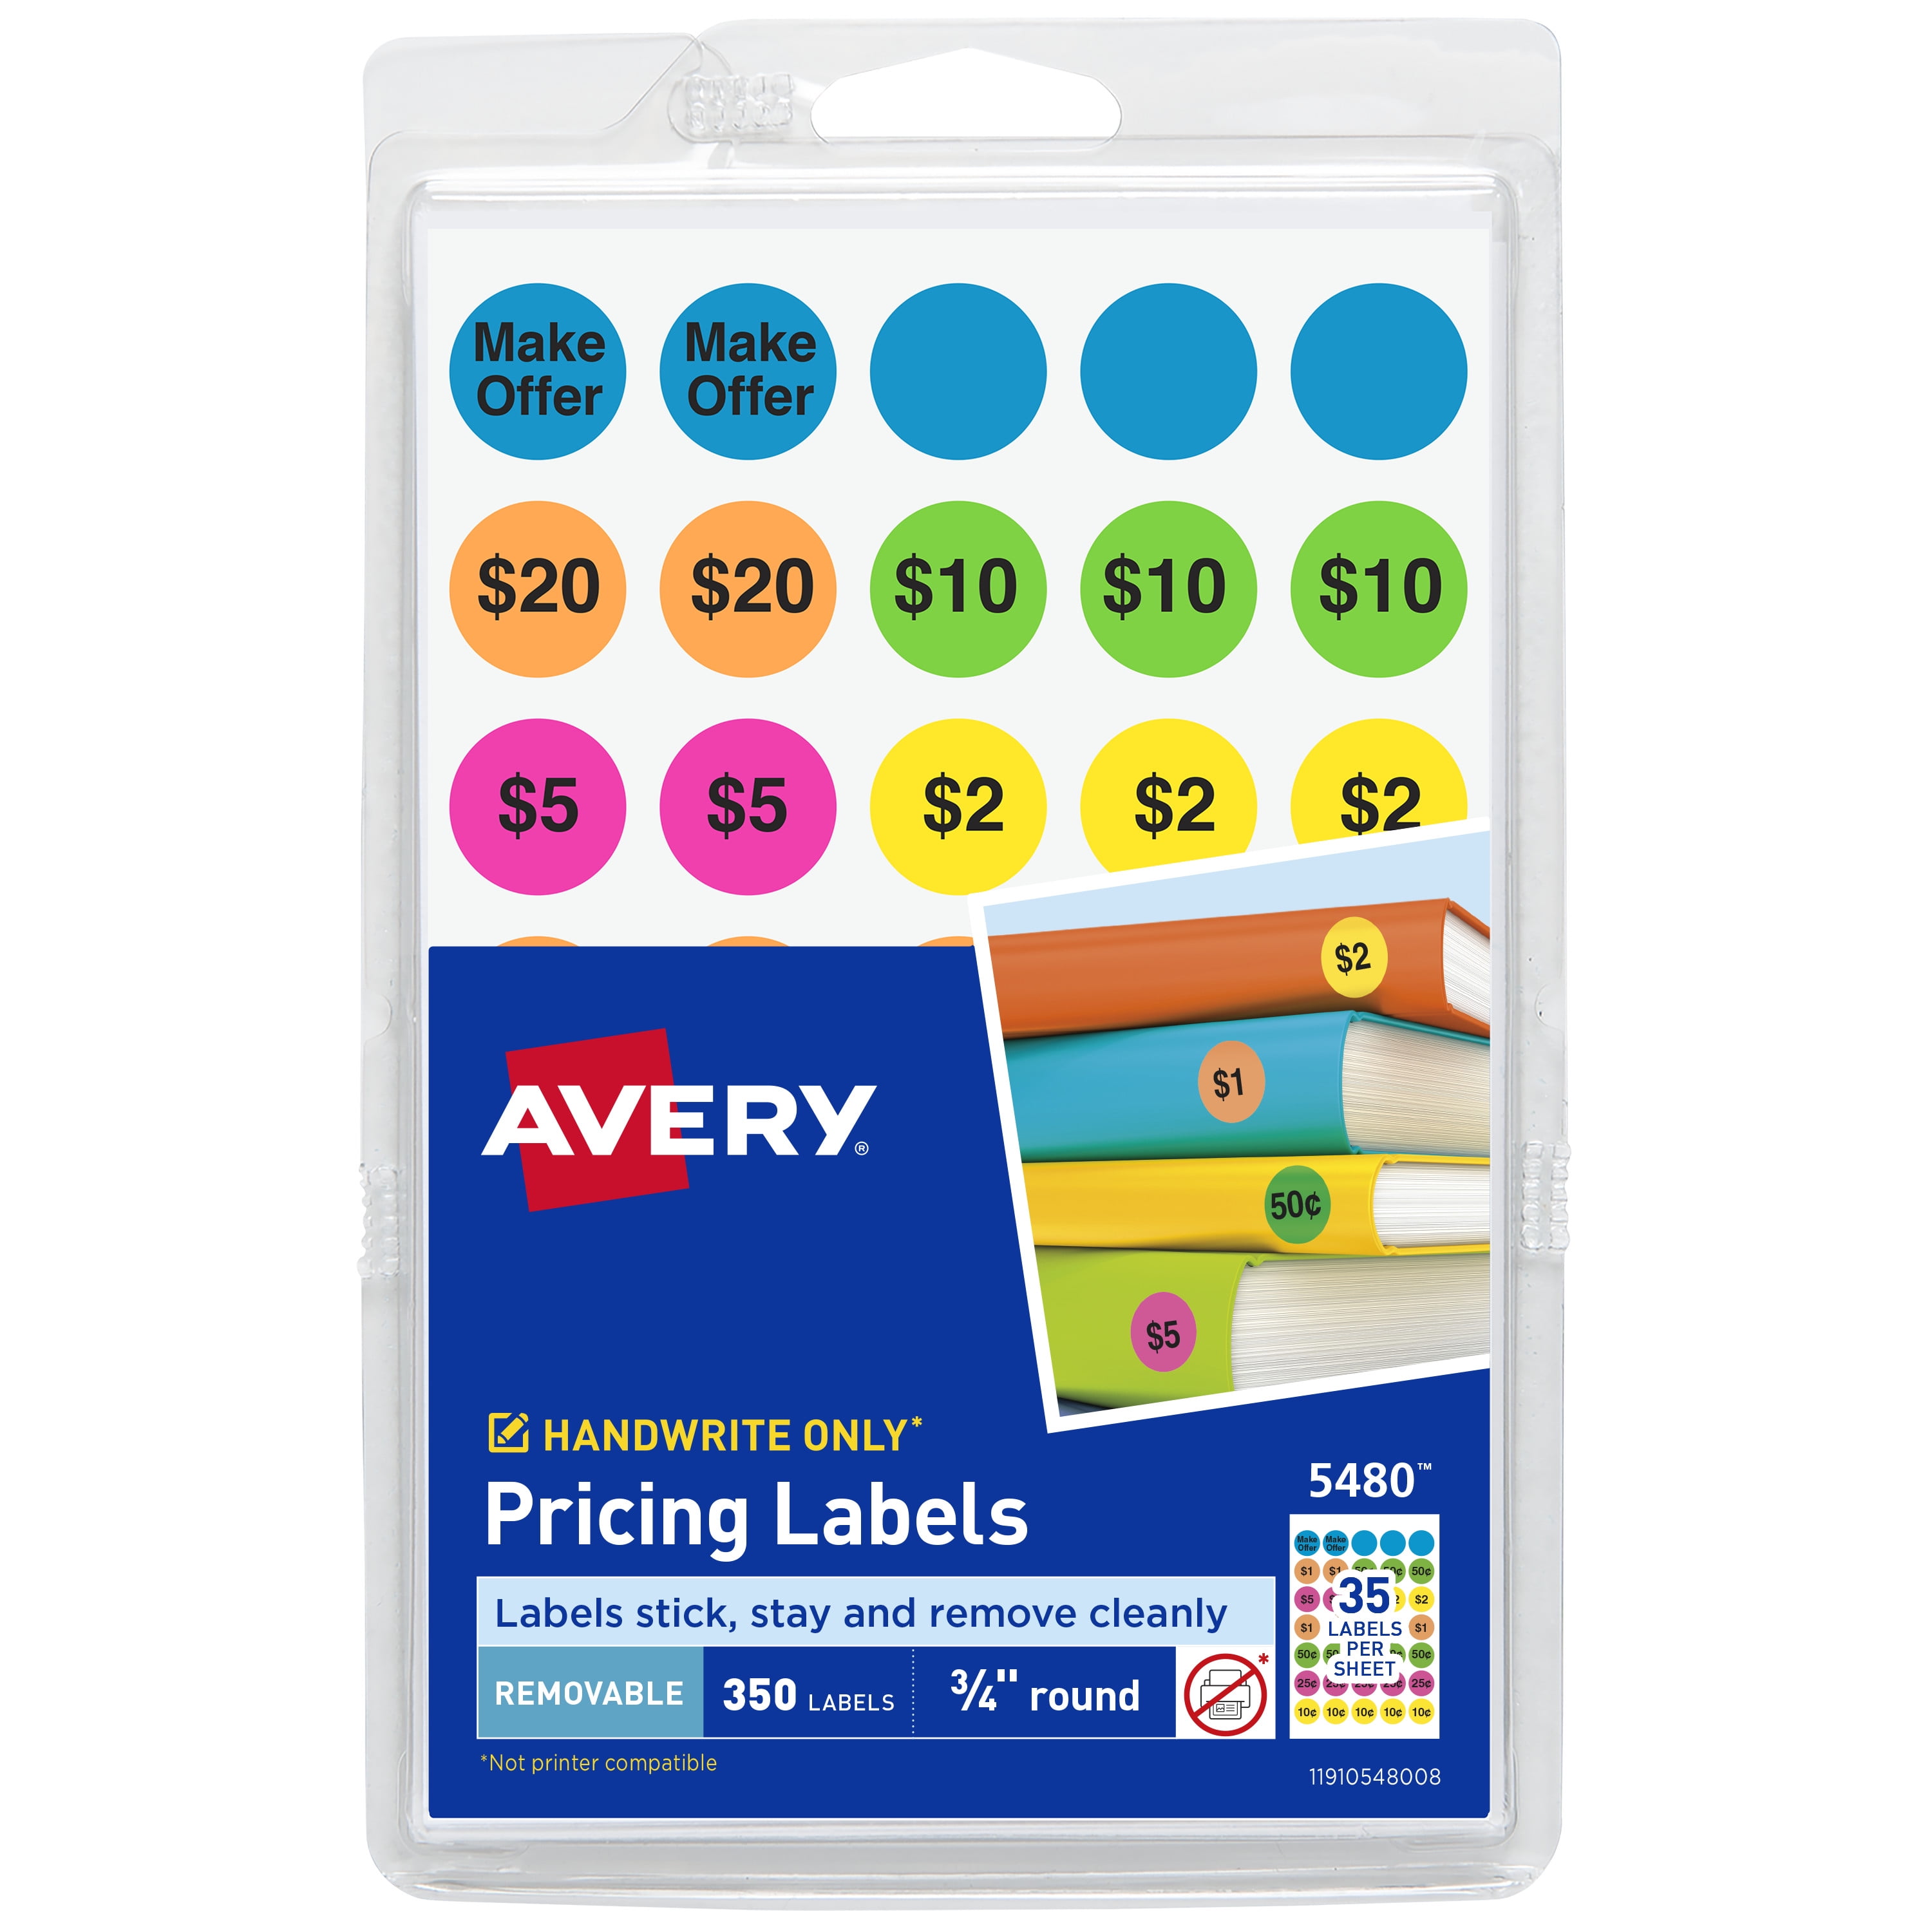 Officesmartlabels 1.5 inch Round Nine Dollars & 99 Cents Pricing Stickers Labels for Retail Pricing, Sales or Yard Sales (1 Roll / Green)